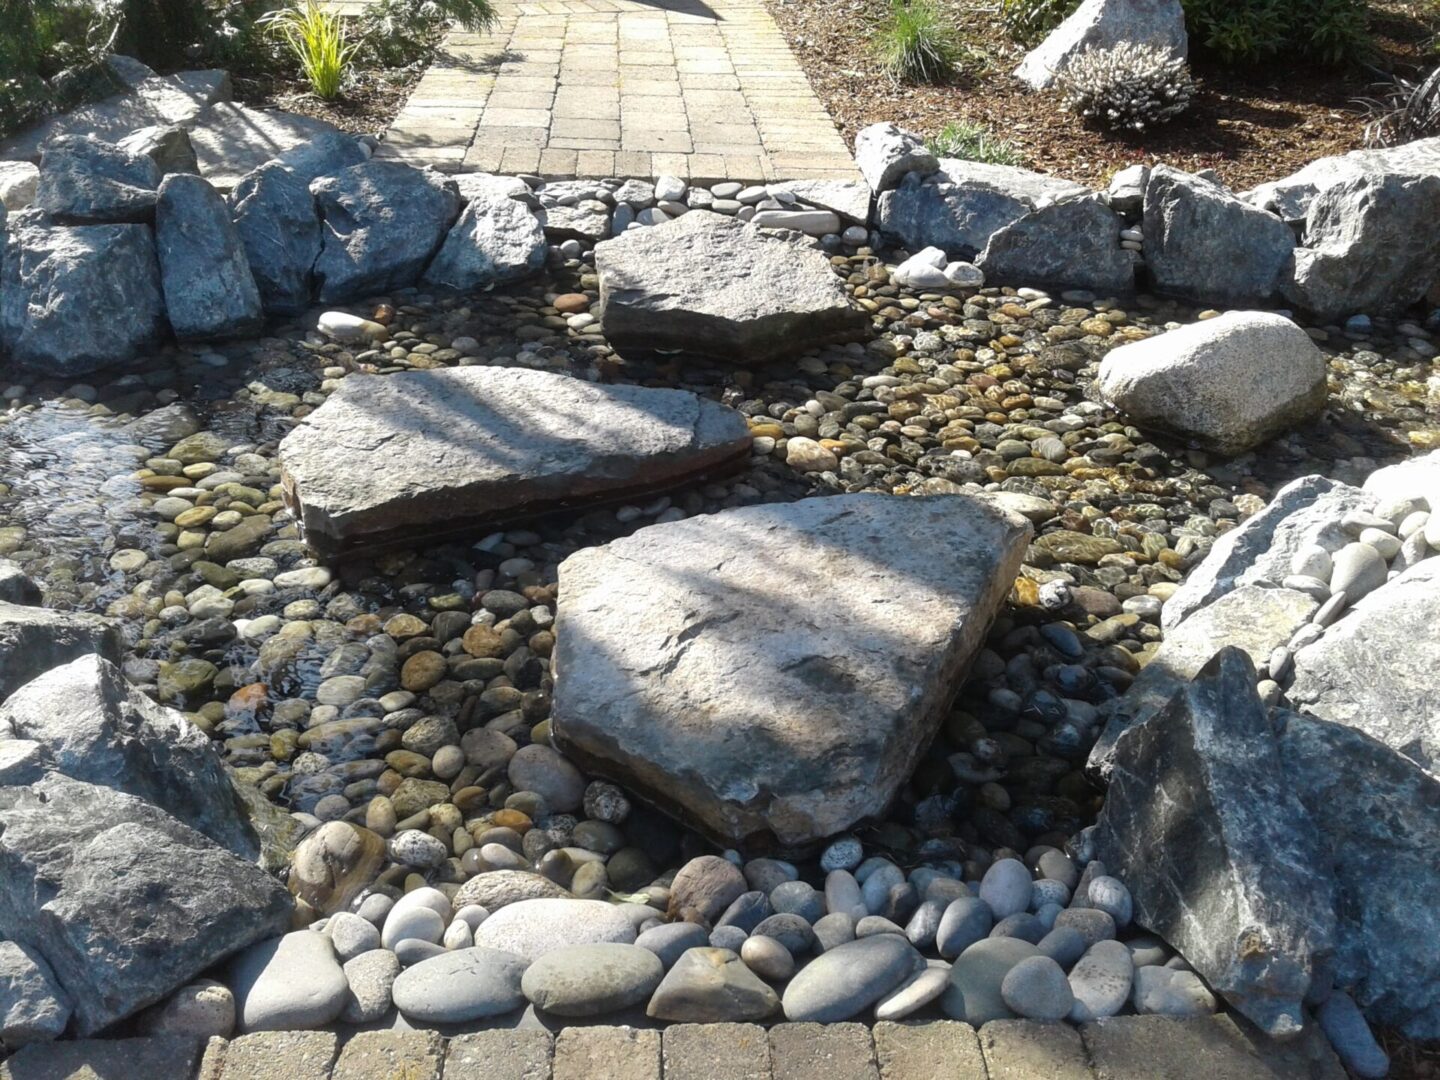 A landscape design featuring large stone slabs forming a stepping path across a bed of smooth, multicolored pebbles with surrounding greenery.